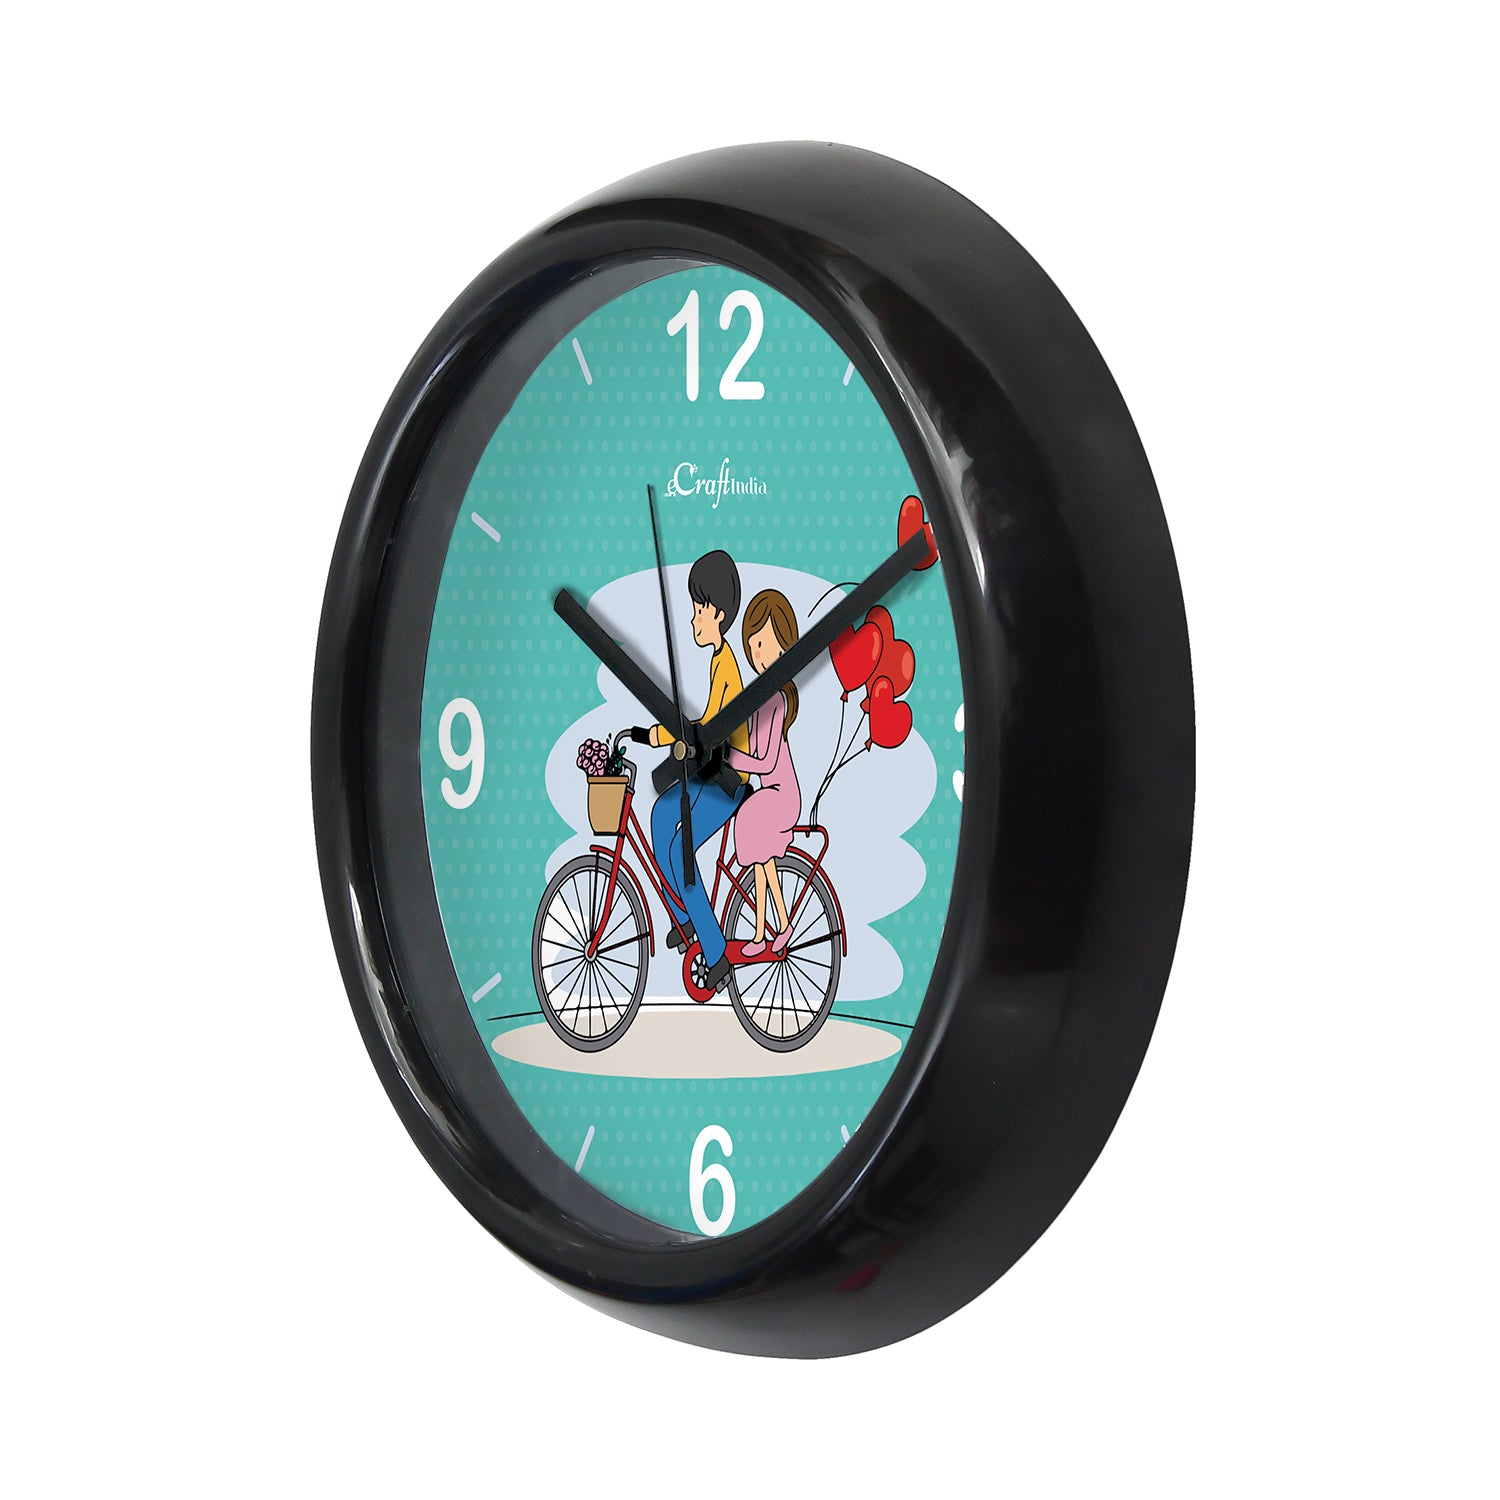 "Couple in Love Riding Bicycle" Blue Designer Round Analog Black Wall Clock 4